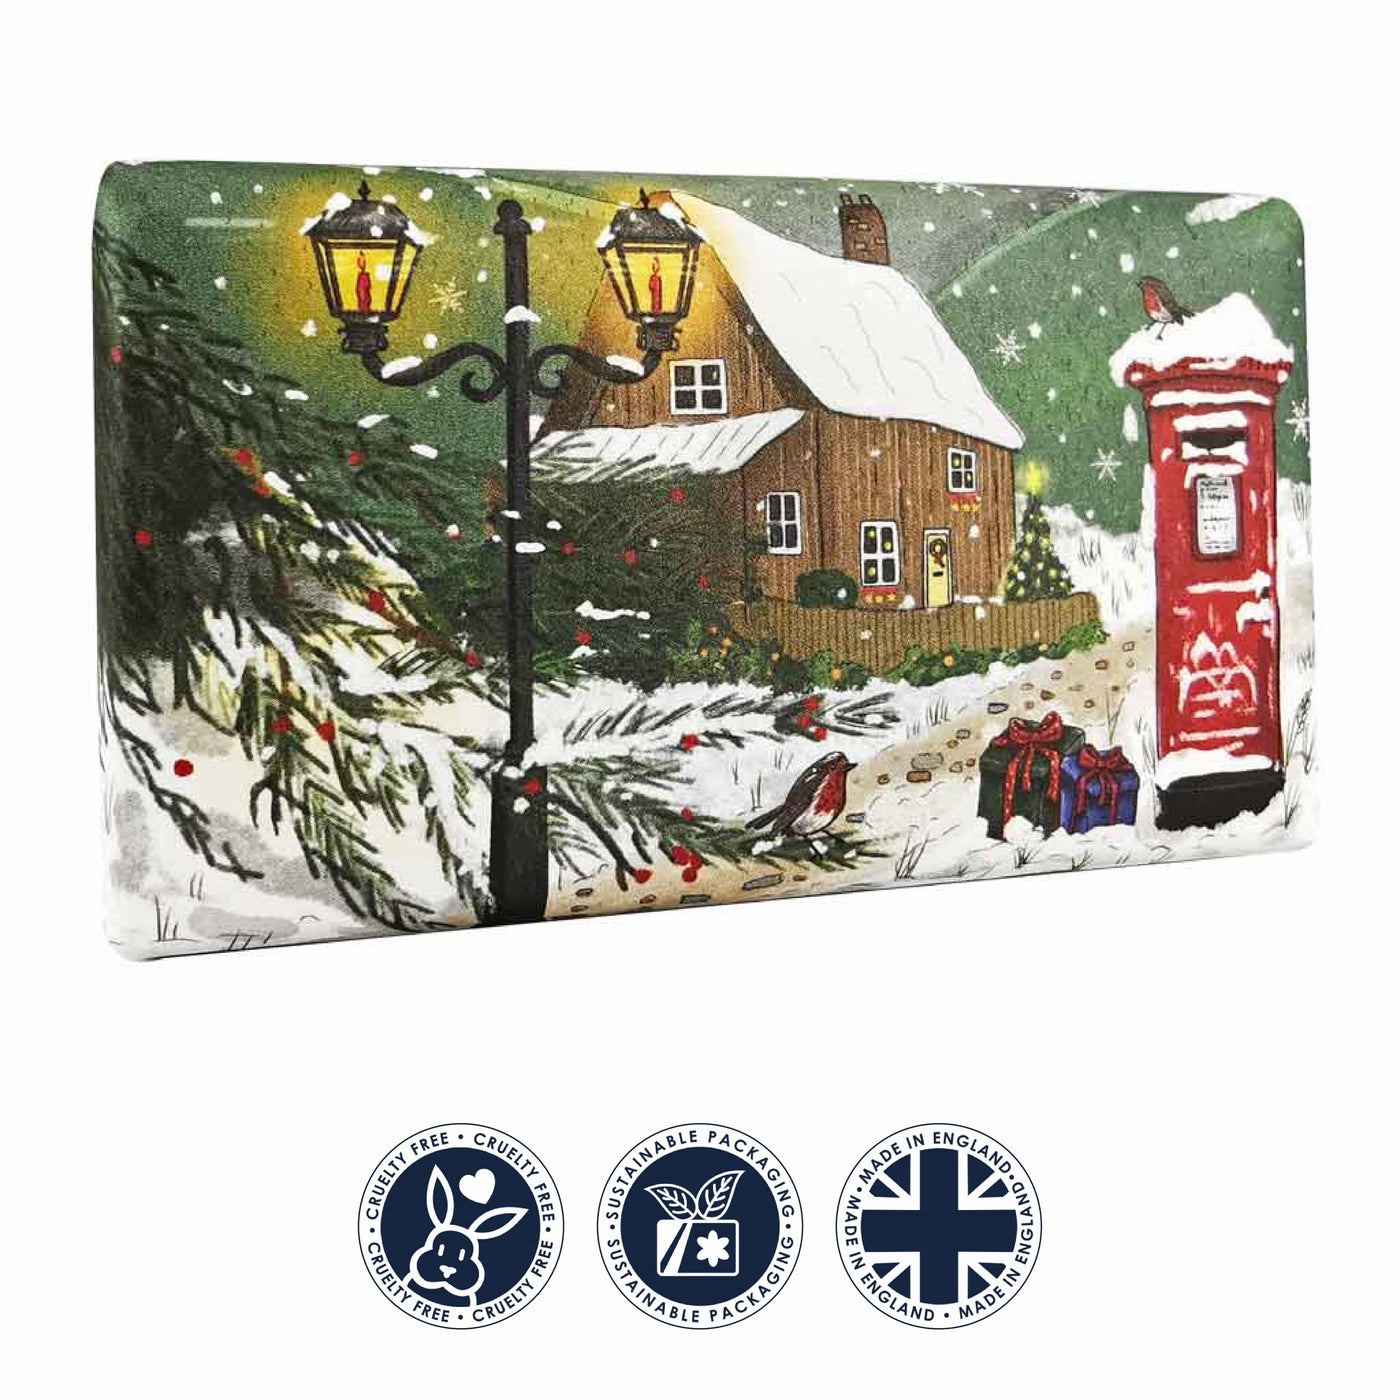 English Countryside in Winter Christmas Soap Bar from our Luxury Bar Soap collection by The English Soap Company